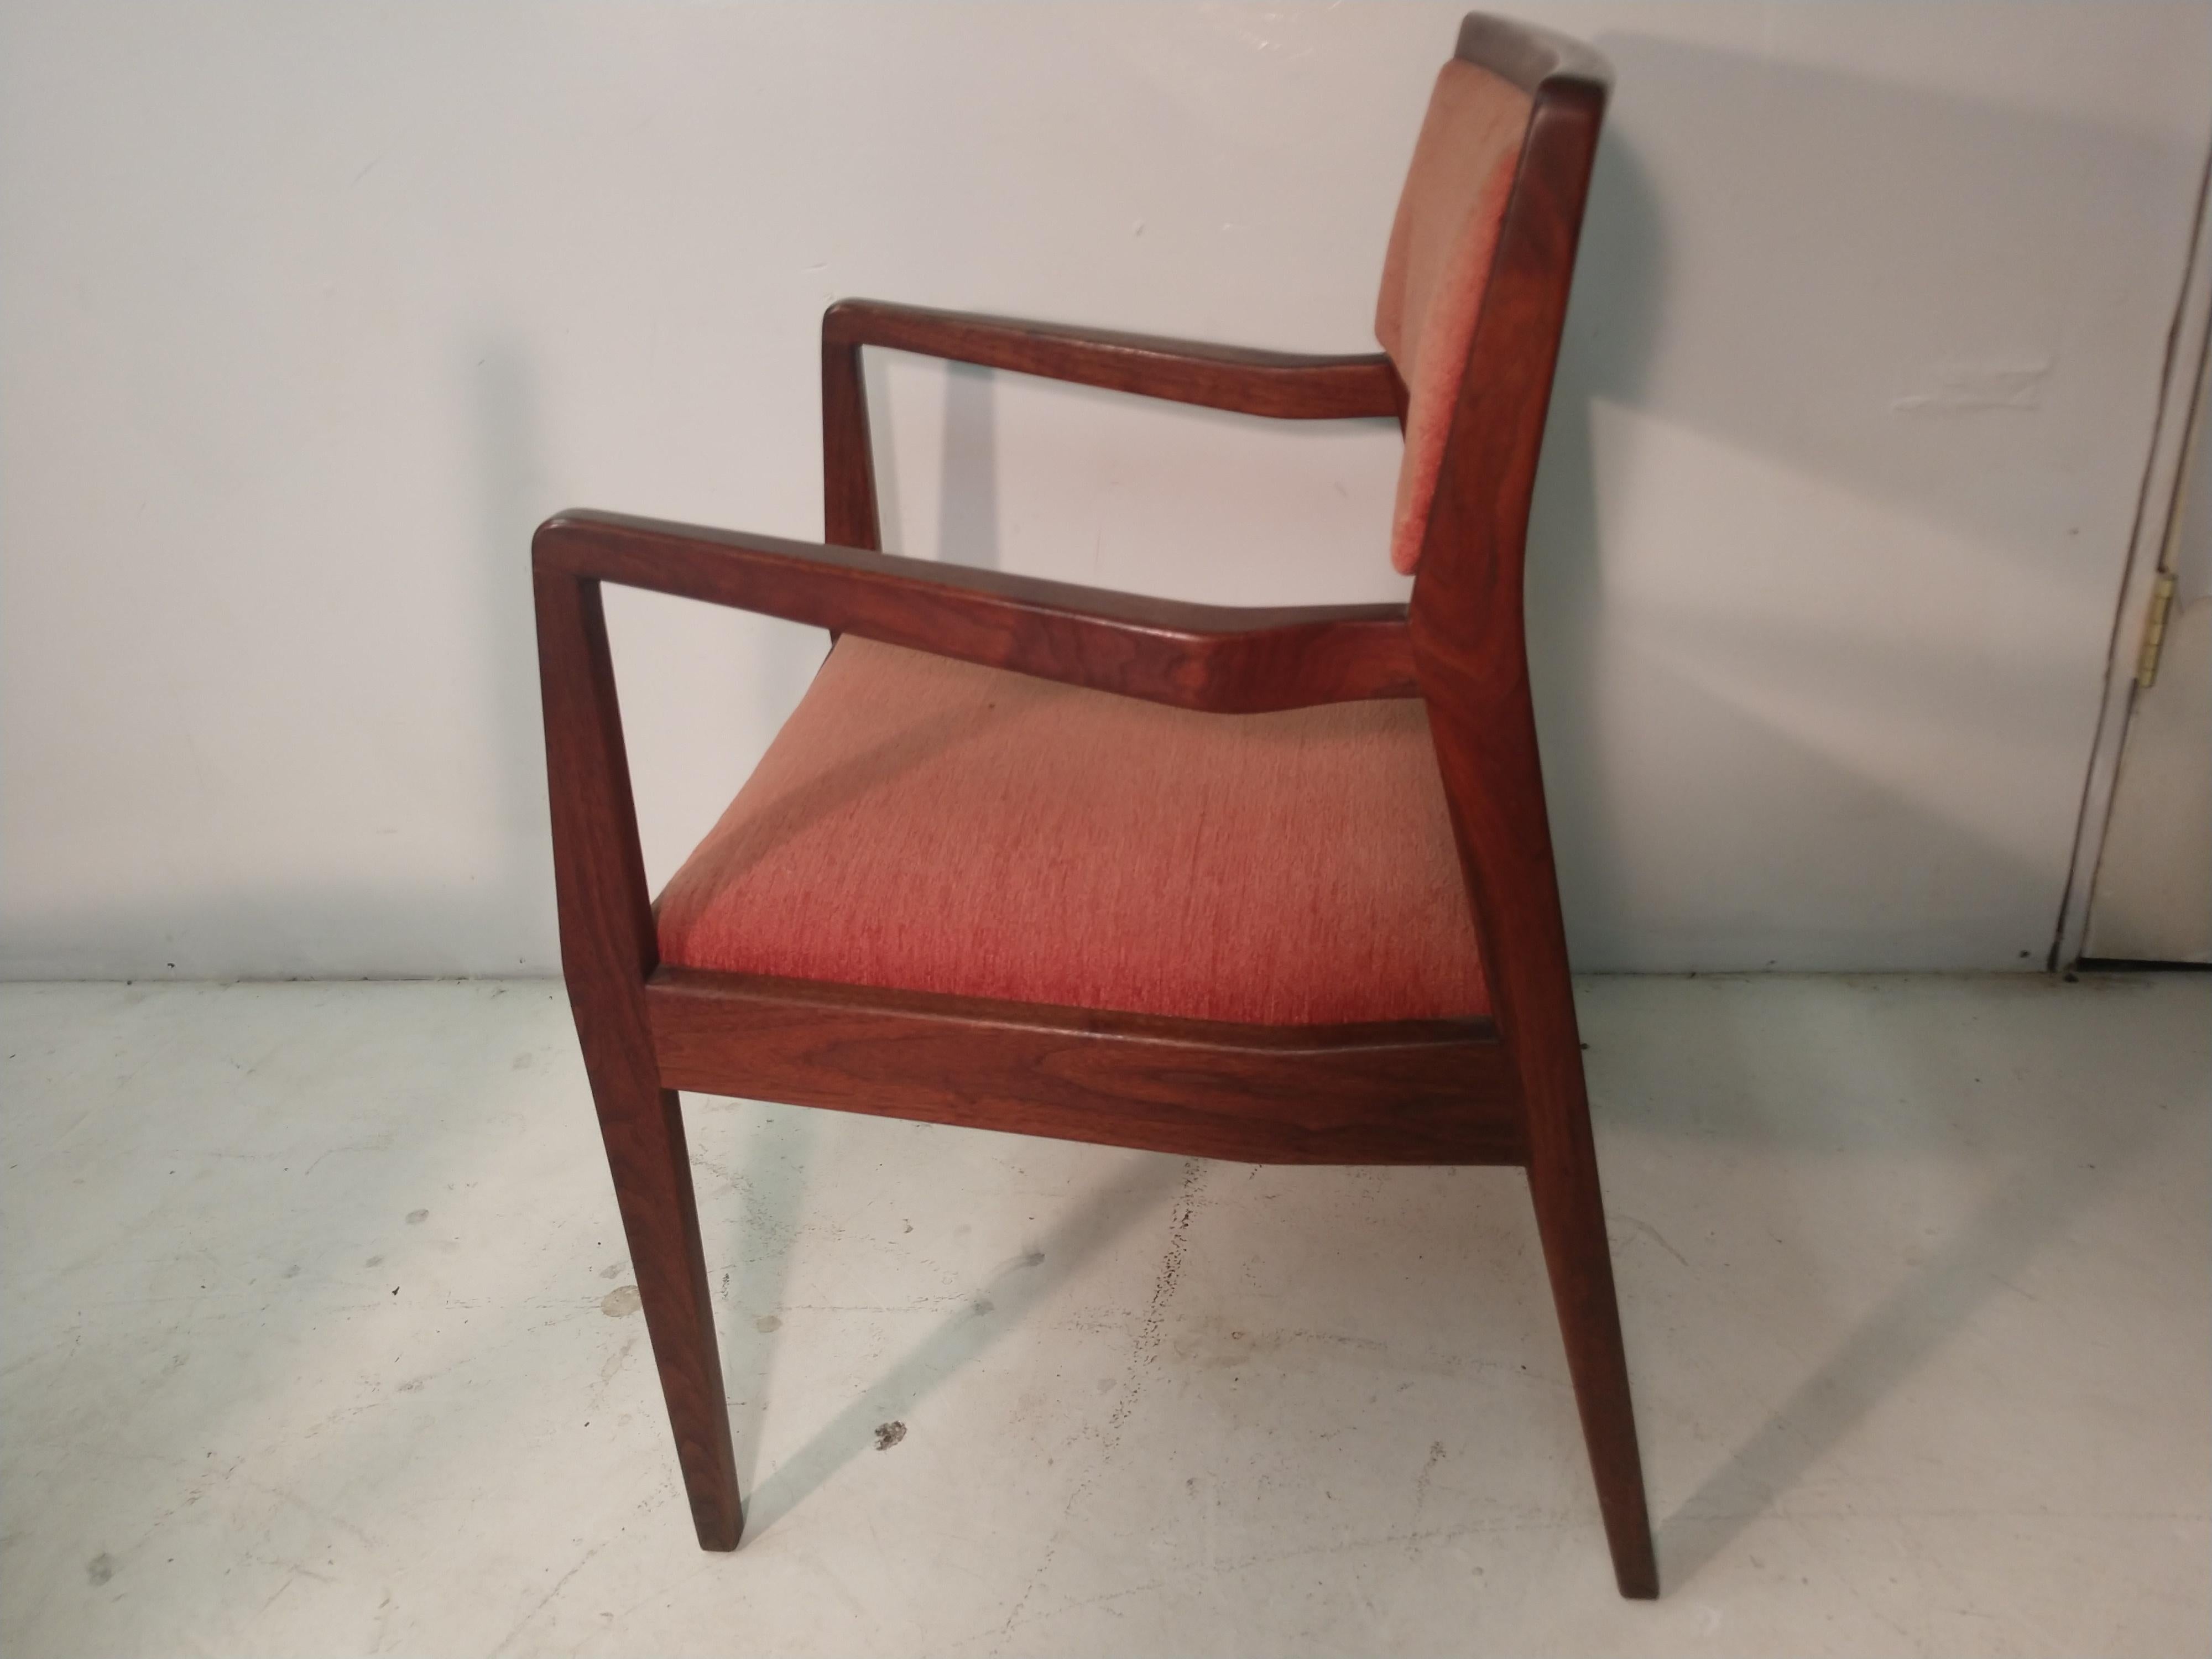 Fabulous set of 6 dining chairs by Jen's Risom. These are the playboy chairs as they were featured in a article on modern furniture in the magazine. 2 arm and 4 side chairs in walnut comprise the set. Excellent vintage condition and very